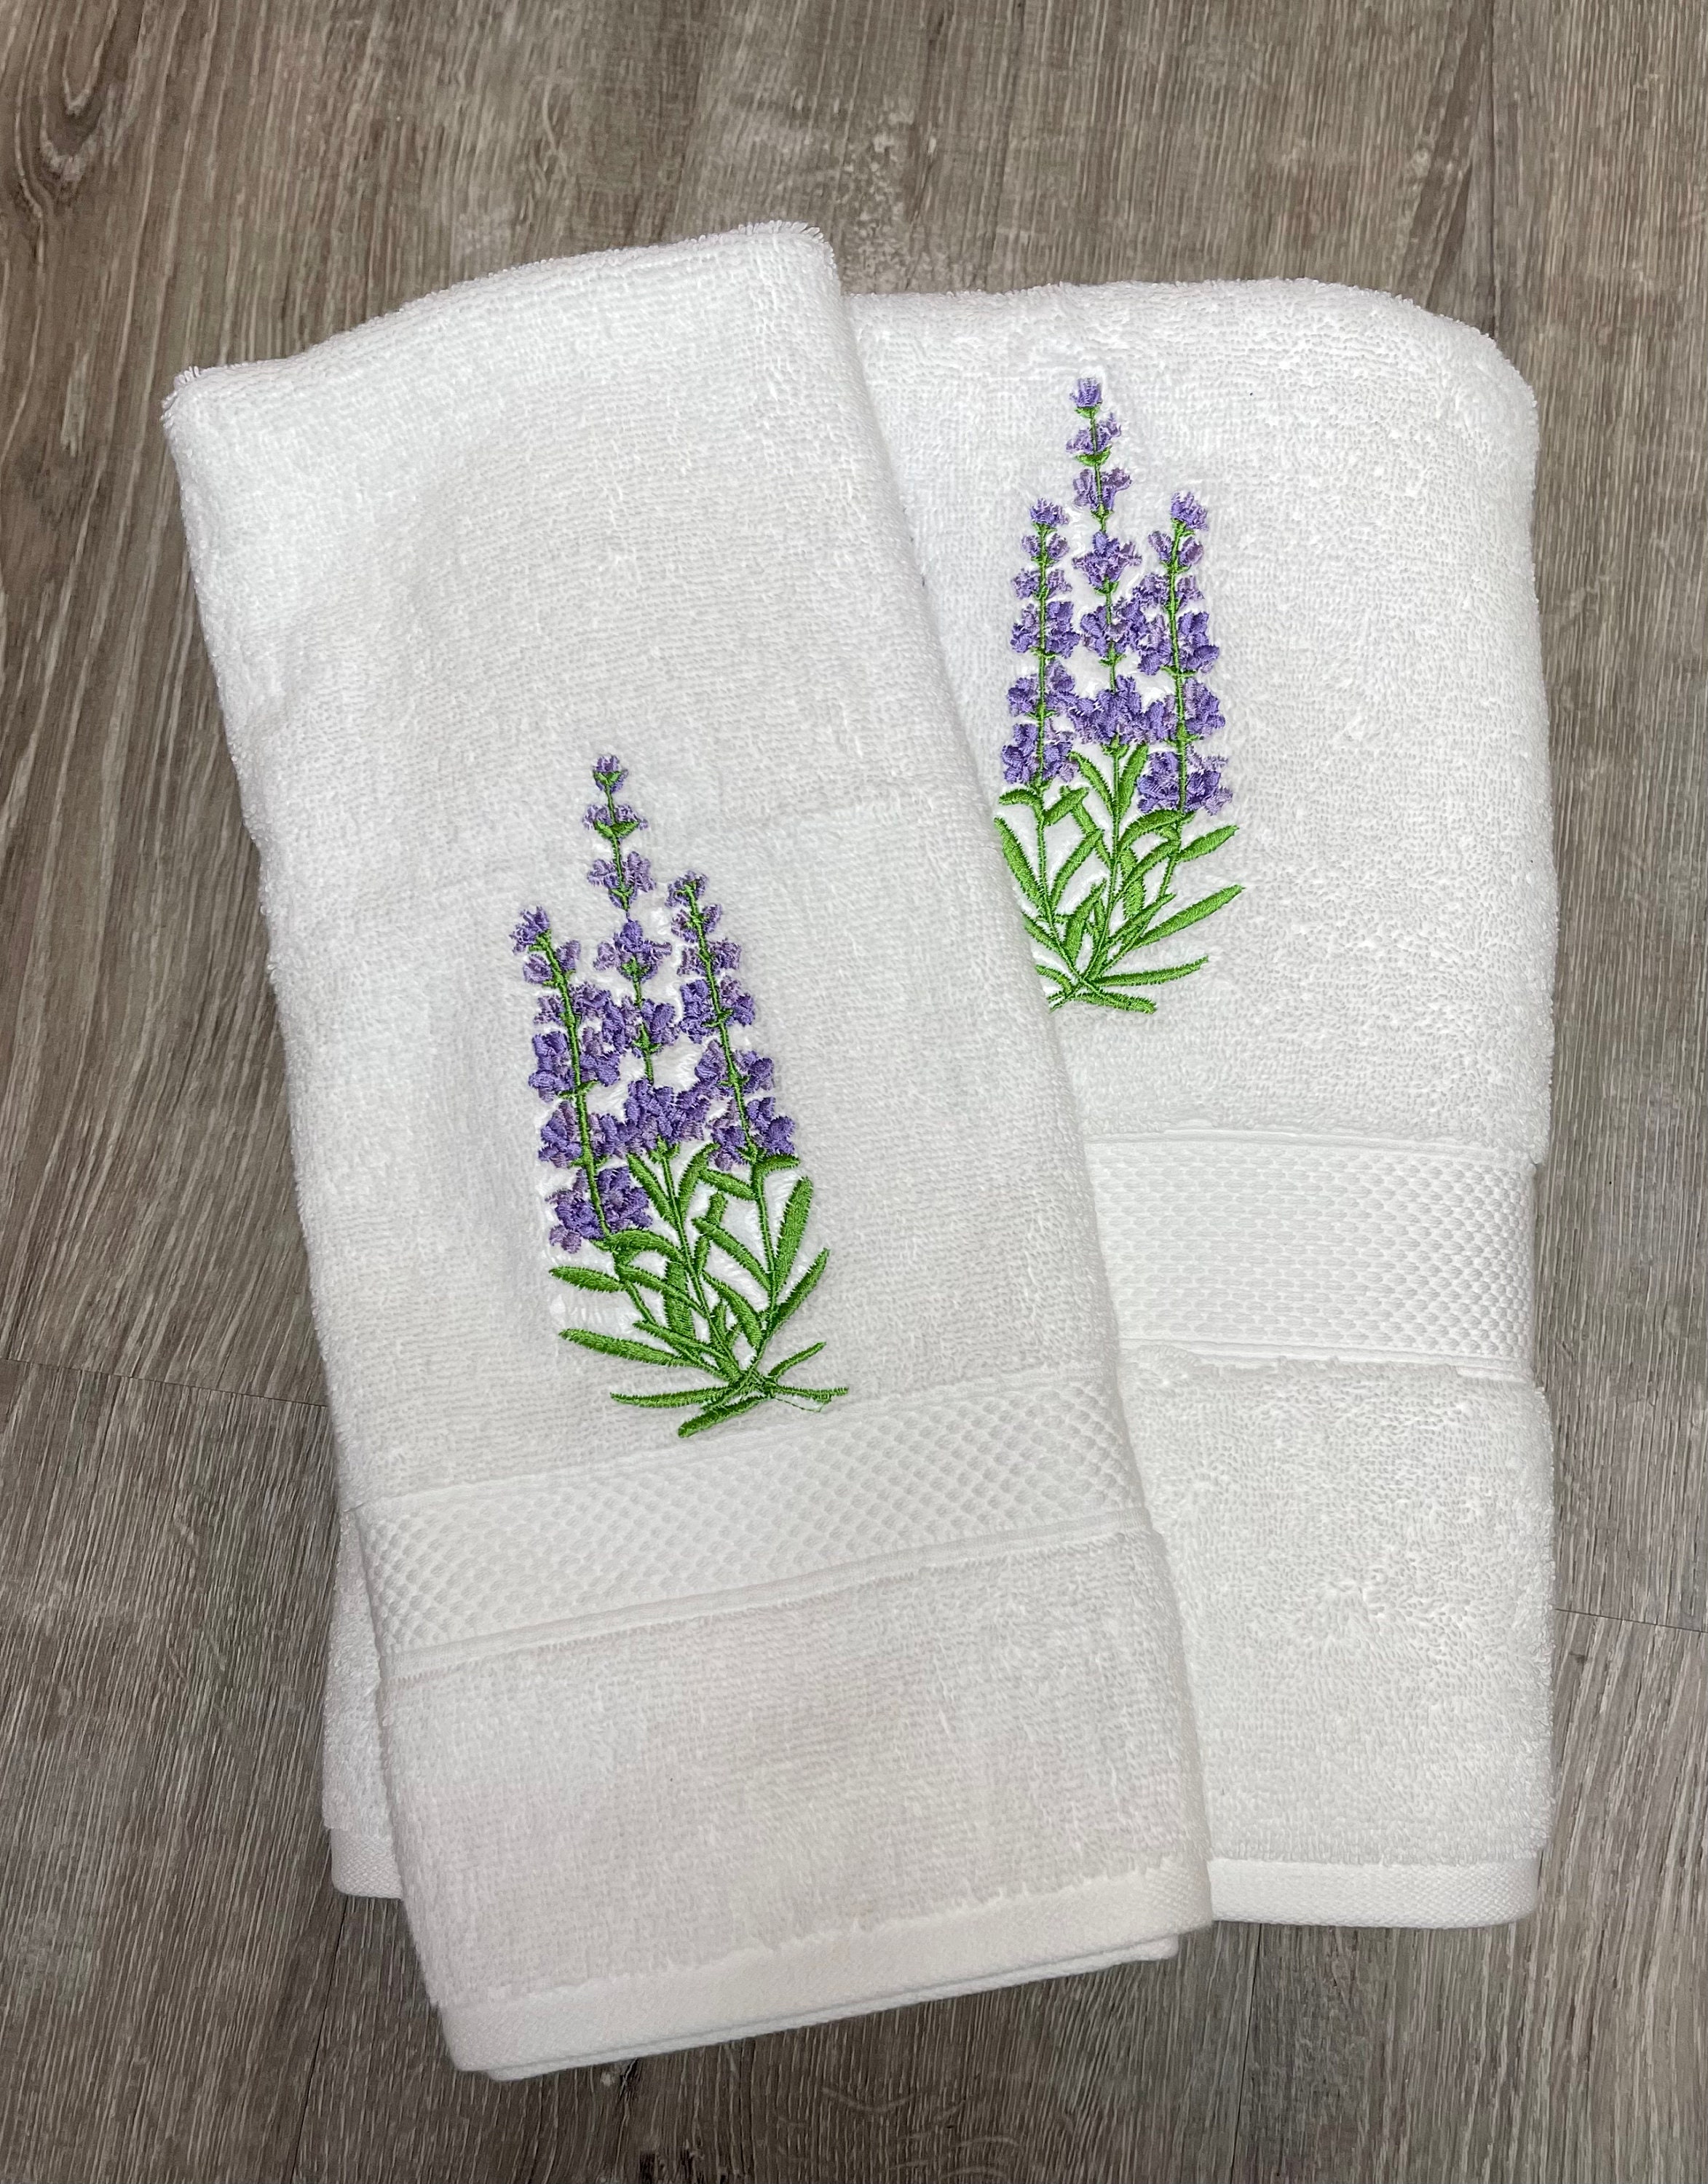 PROVENCE GARDEN BEIGE Round Hand Towel - High quality super soft and  absorbent thick cotton fabric - Decorative Kitchen Bathroom Towels -  Provence Lavender Flower Herbs Gardening Lovers - French Country Home Decor